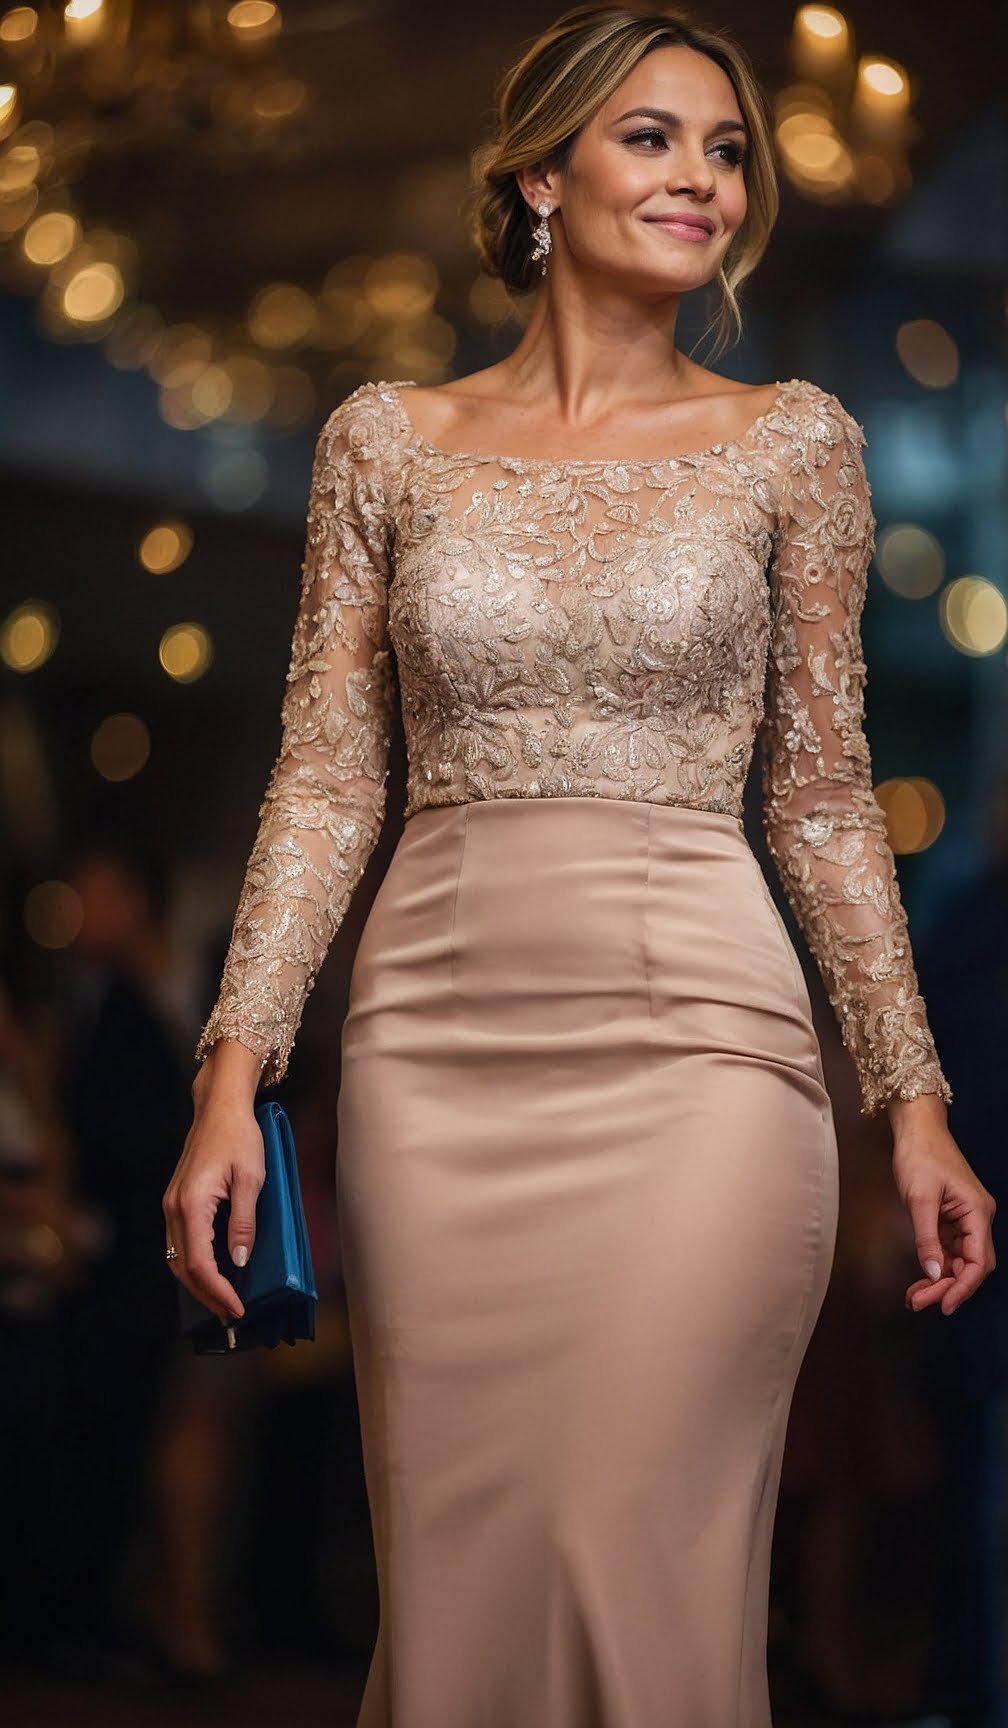 Glamorous Long Sleeve Lace Overlay Gown with Nude Satin Skirt for Evening